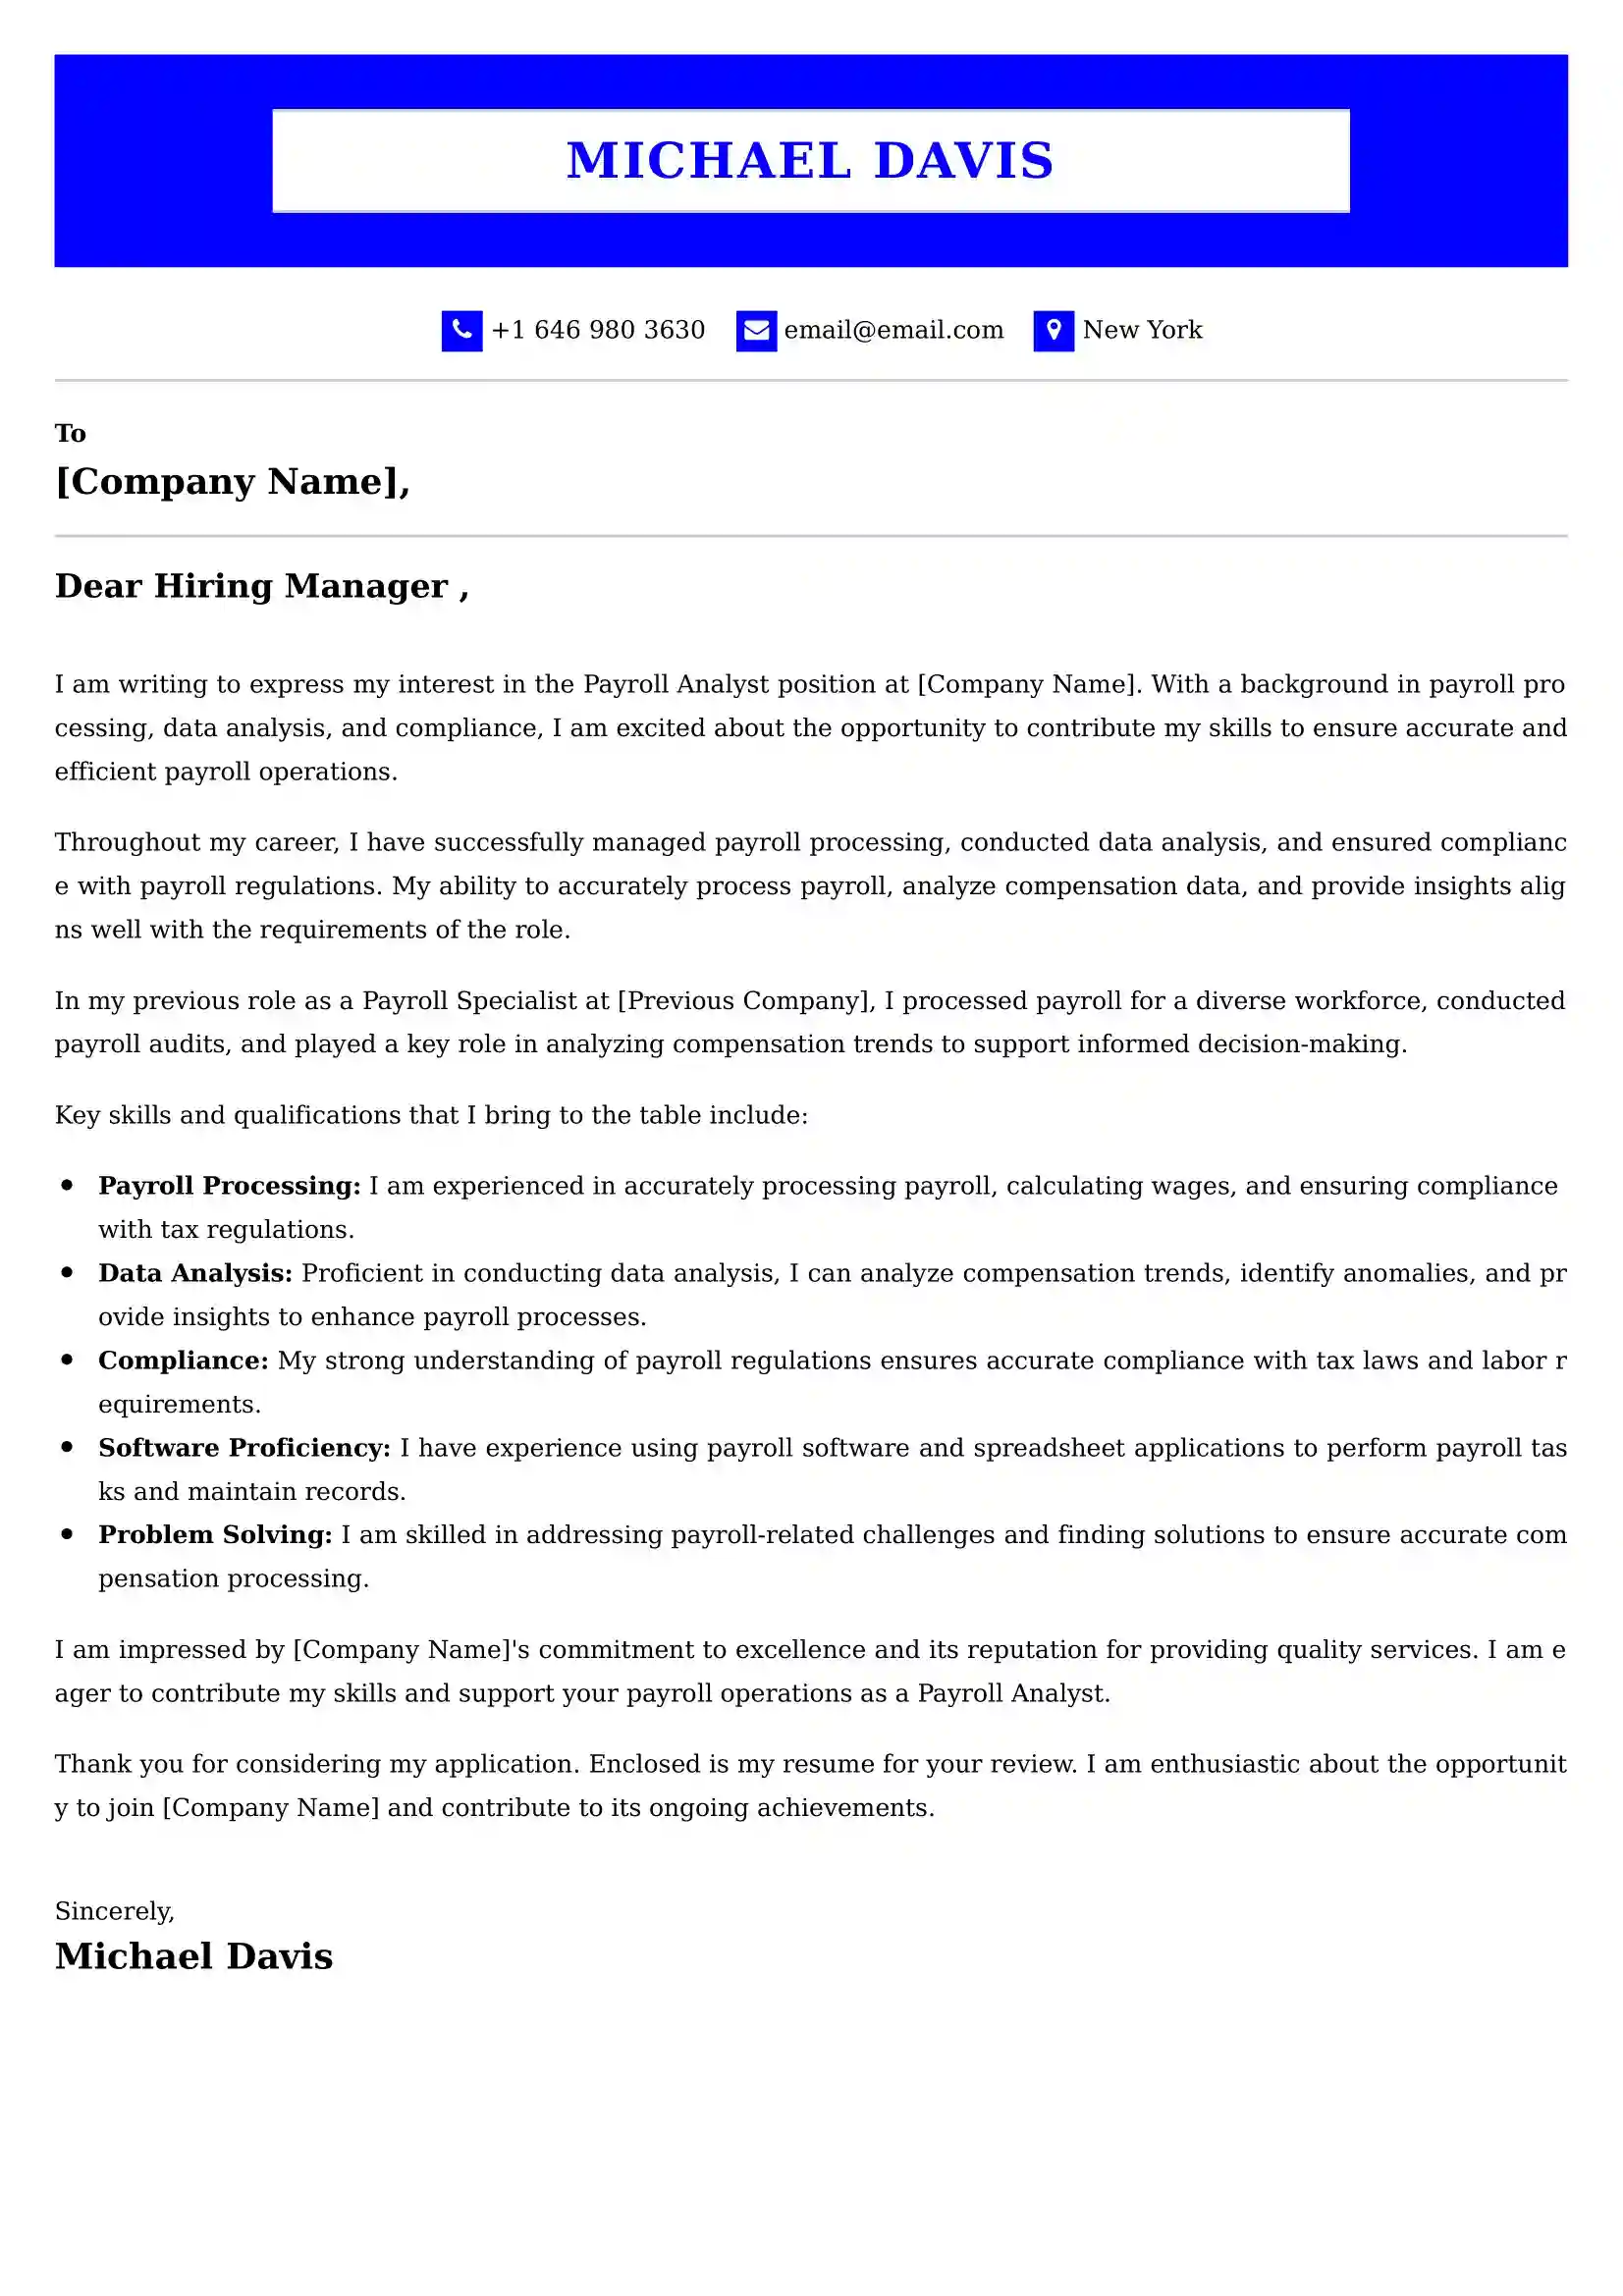 Payroll Analyst Cover Letter Examples for UK 